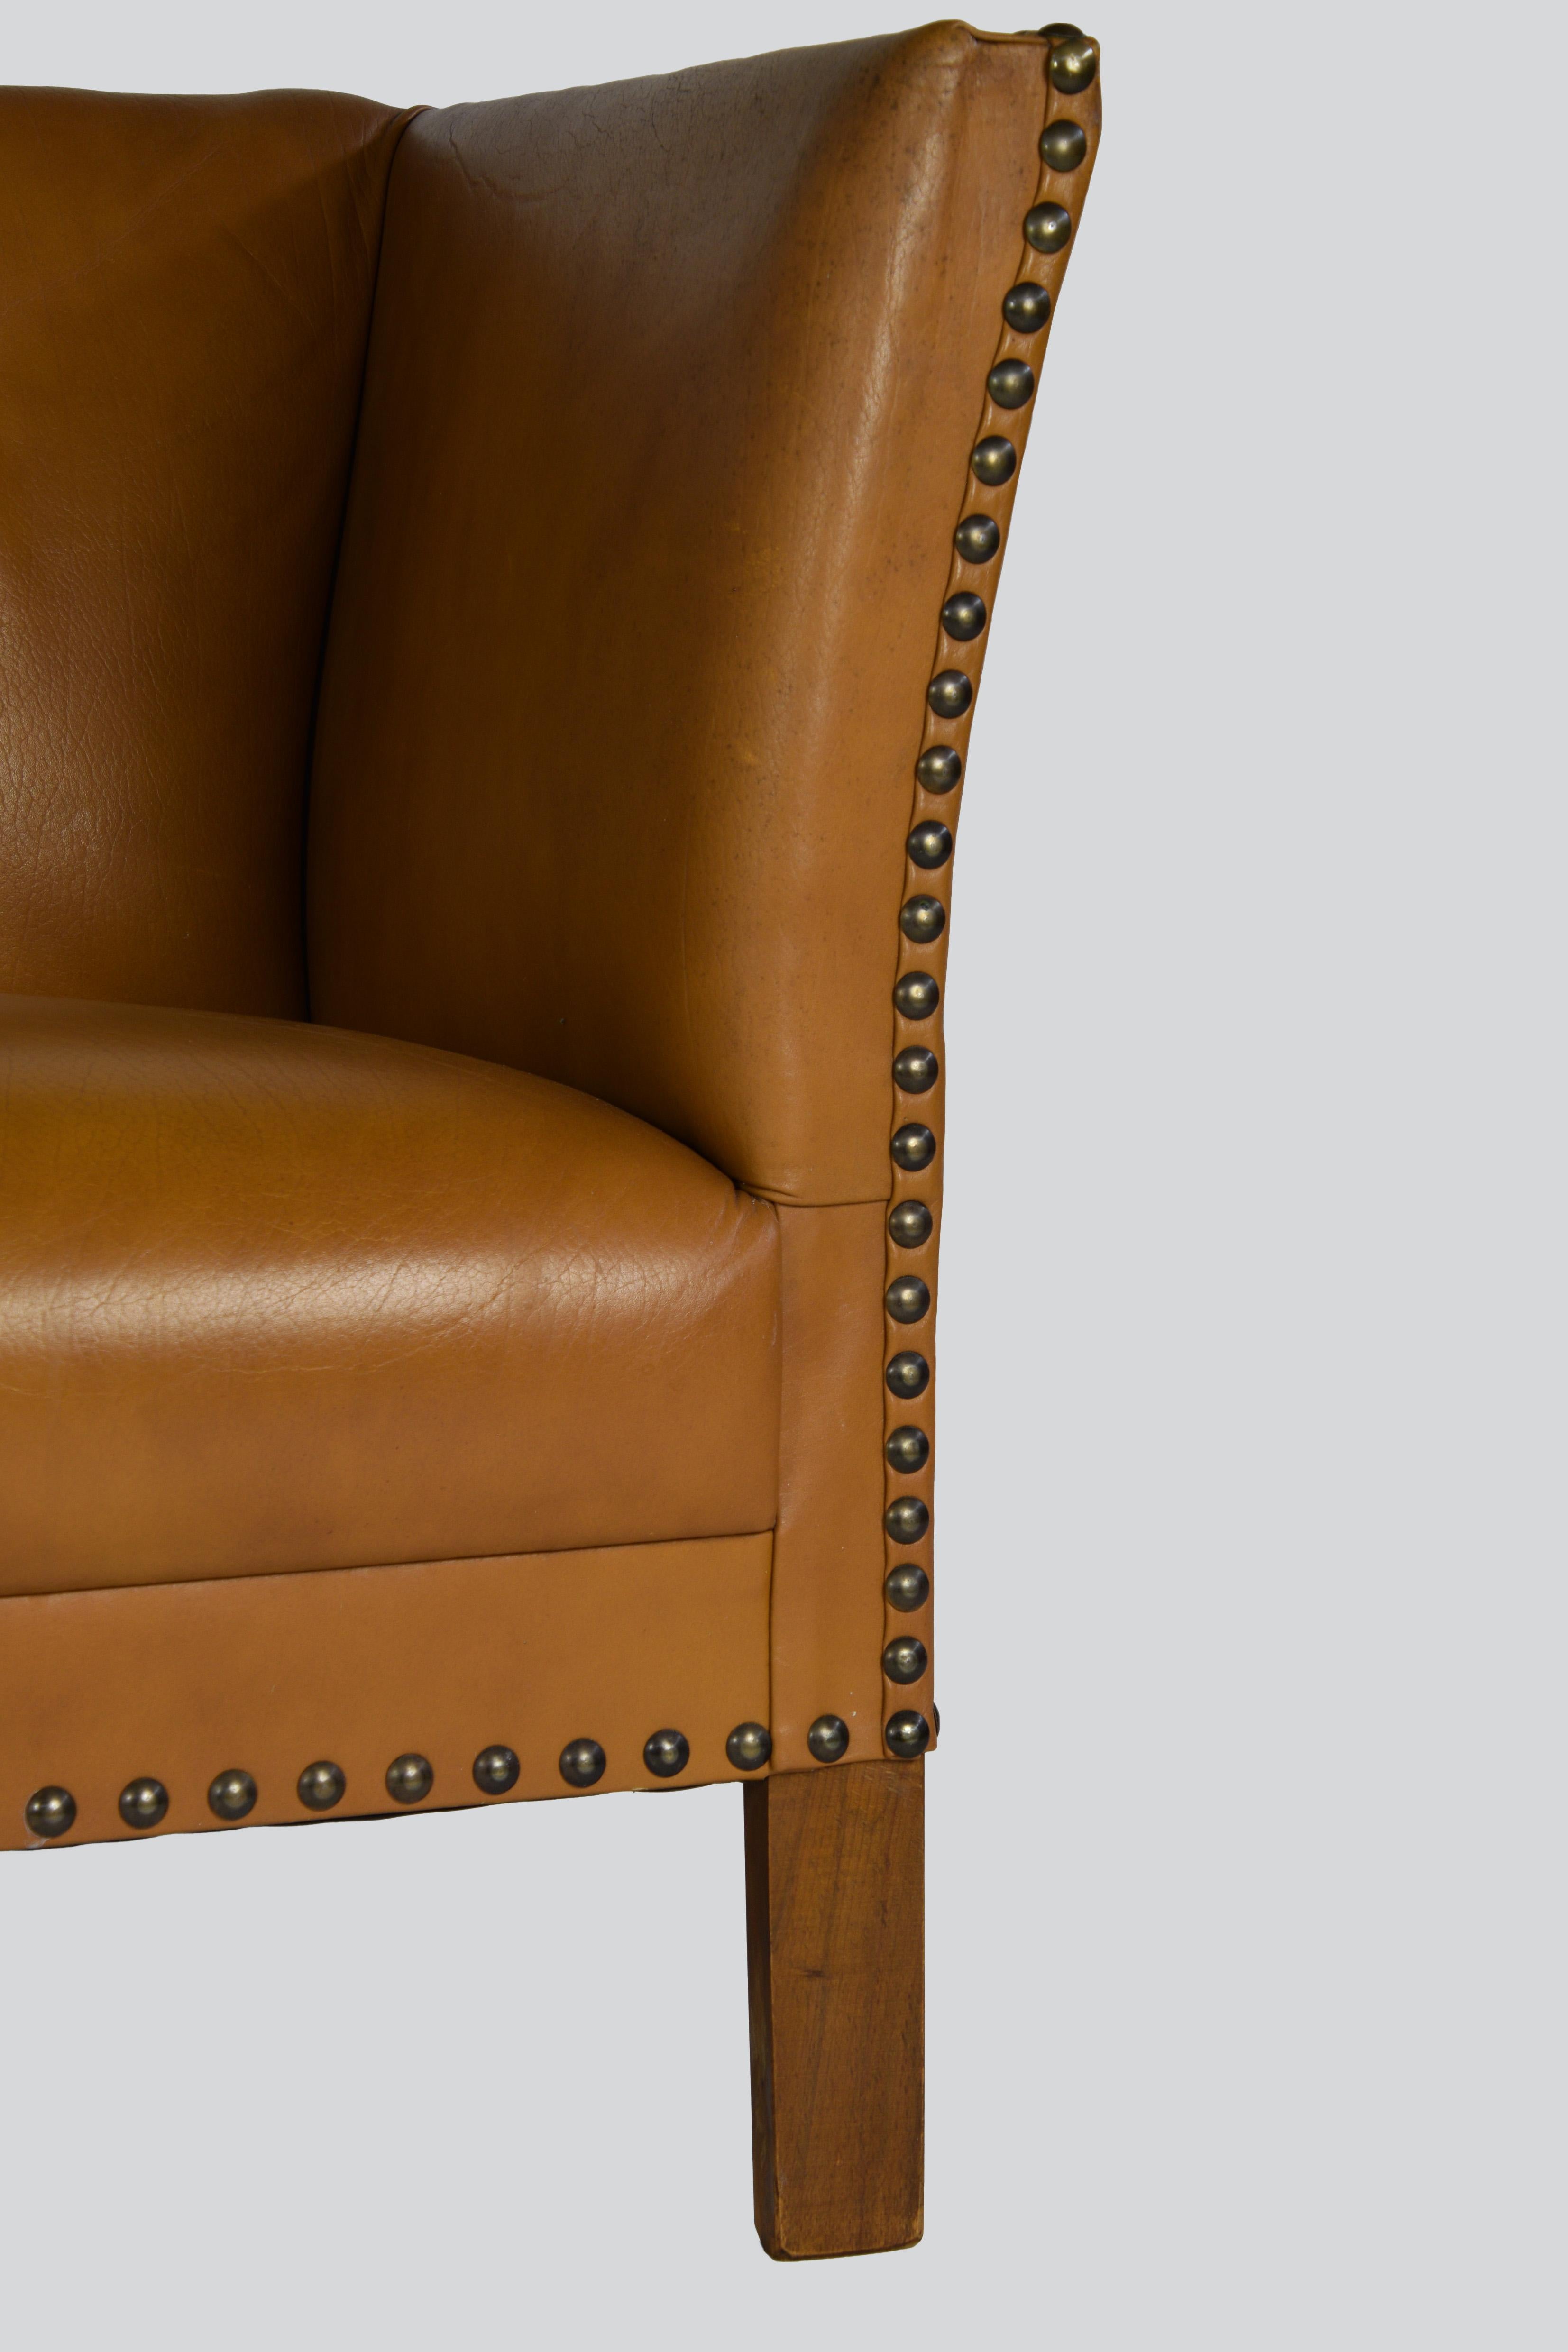 Other Danish Settee in Caramel Nappa, Brass Nailed Upholstery, Made in Denmark in 1940